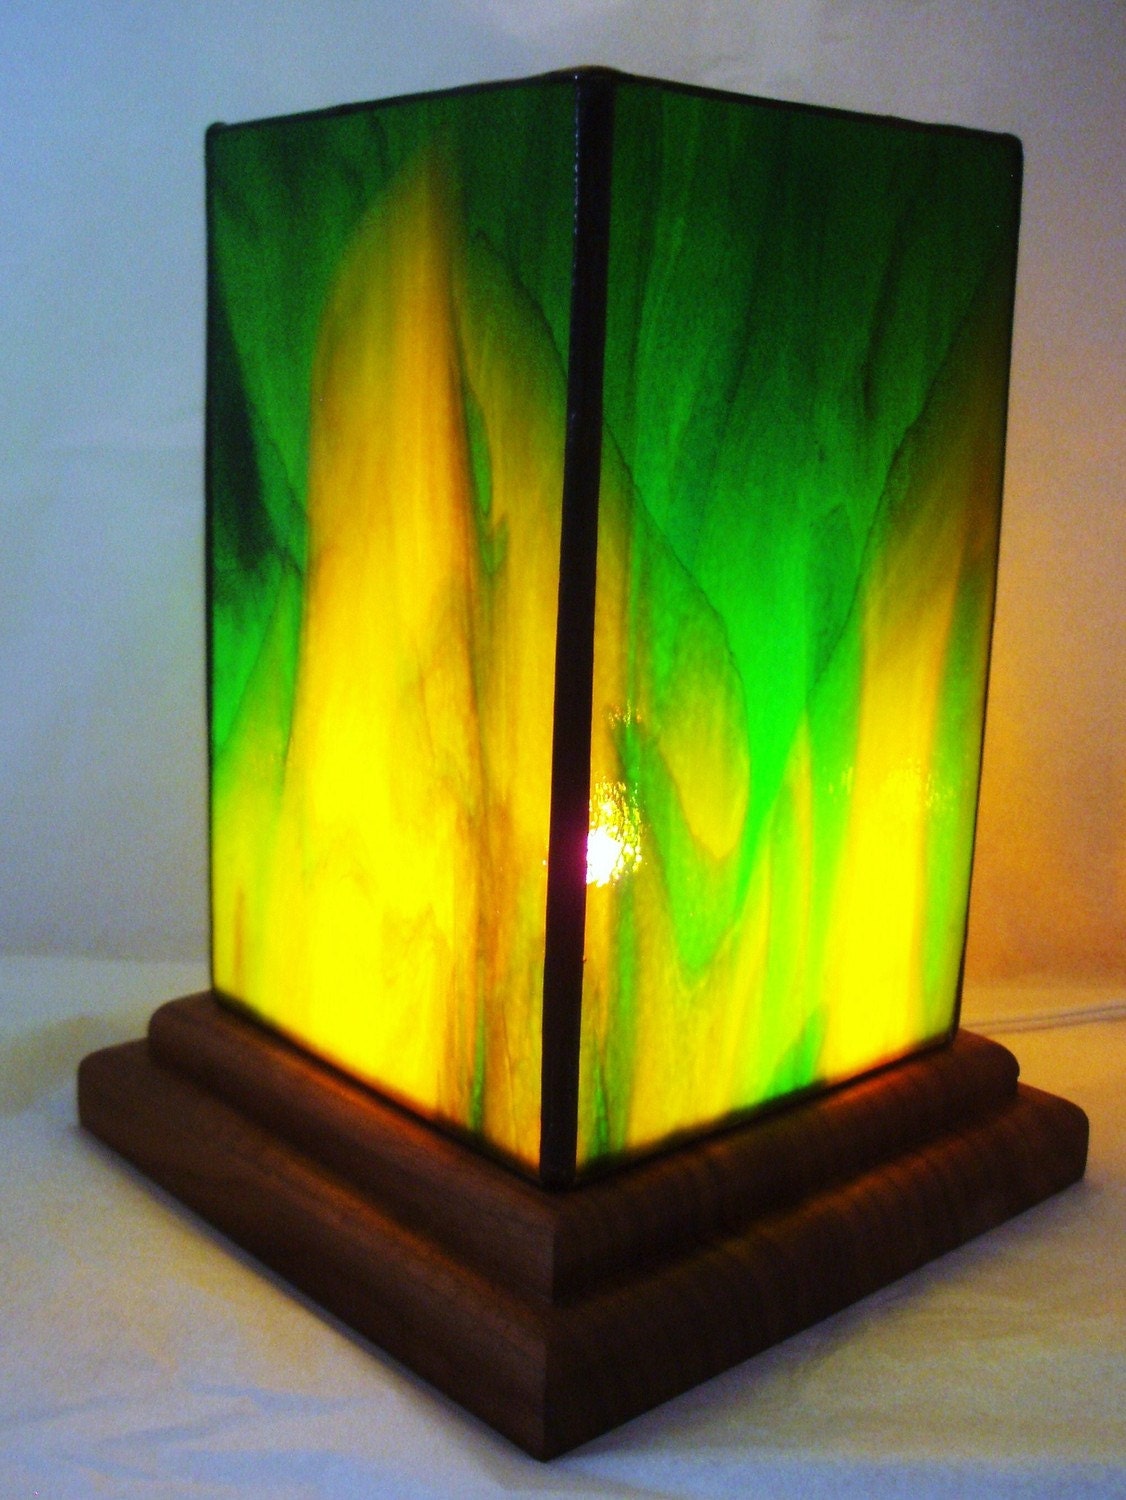 Green and yellow stained glass table lantern